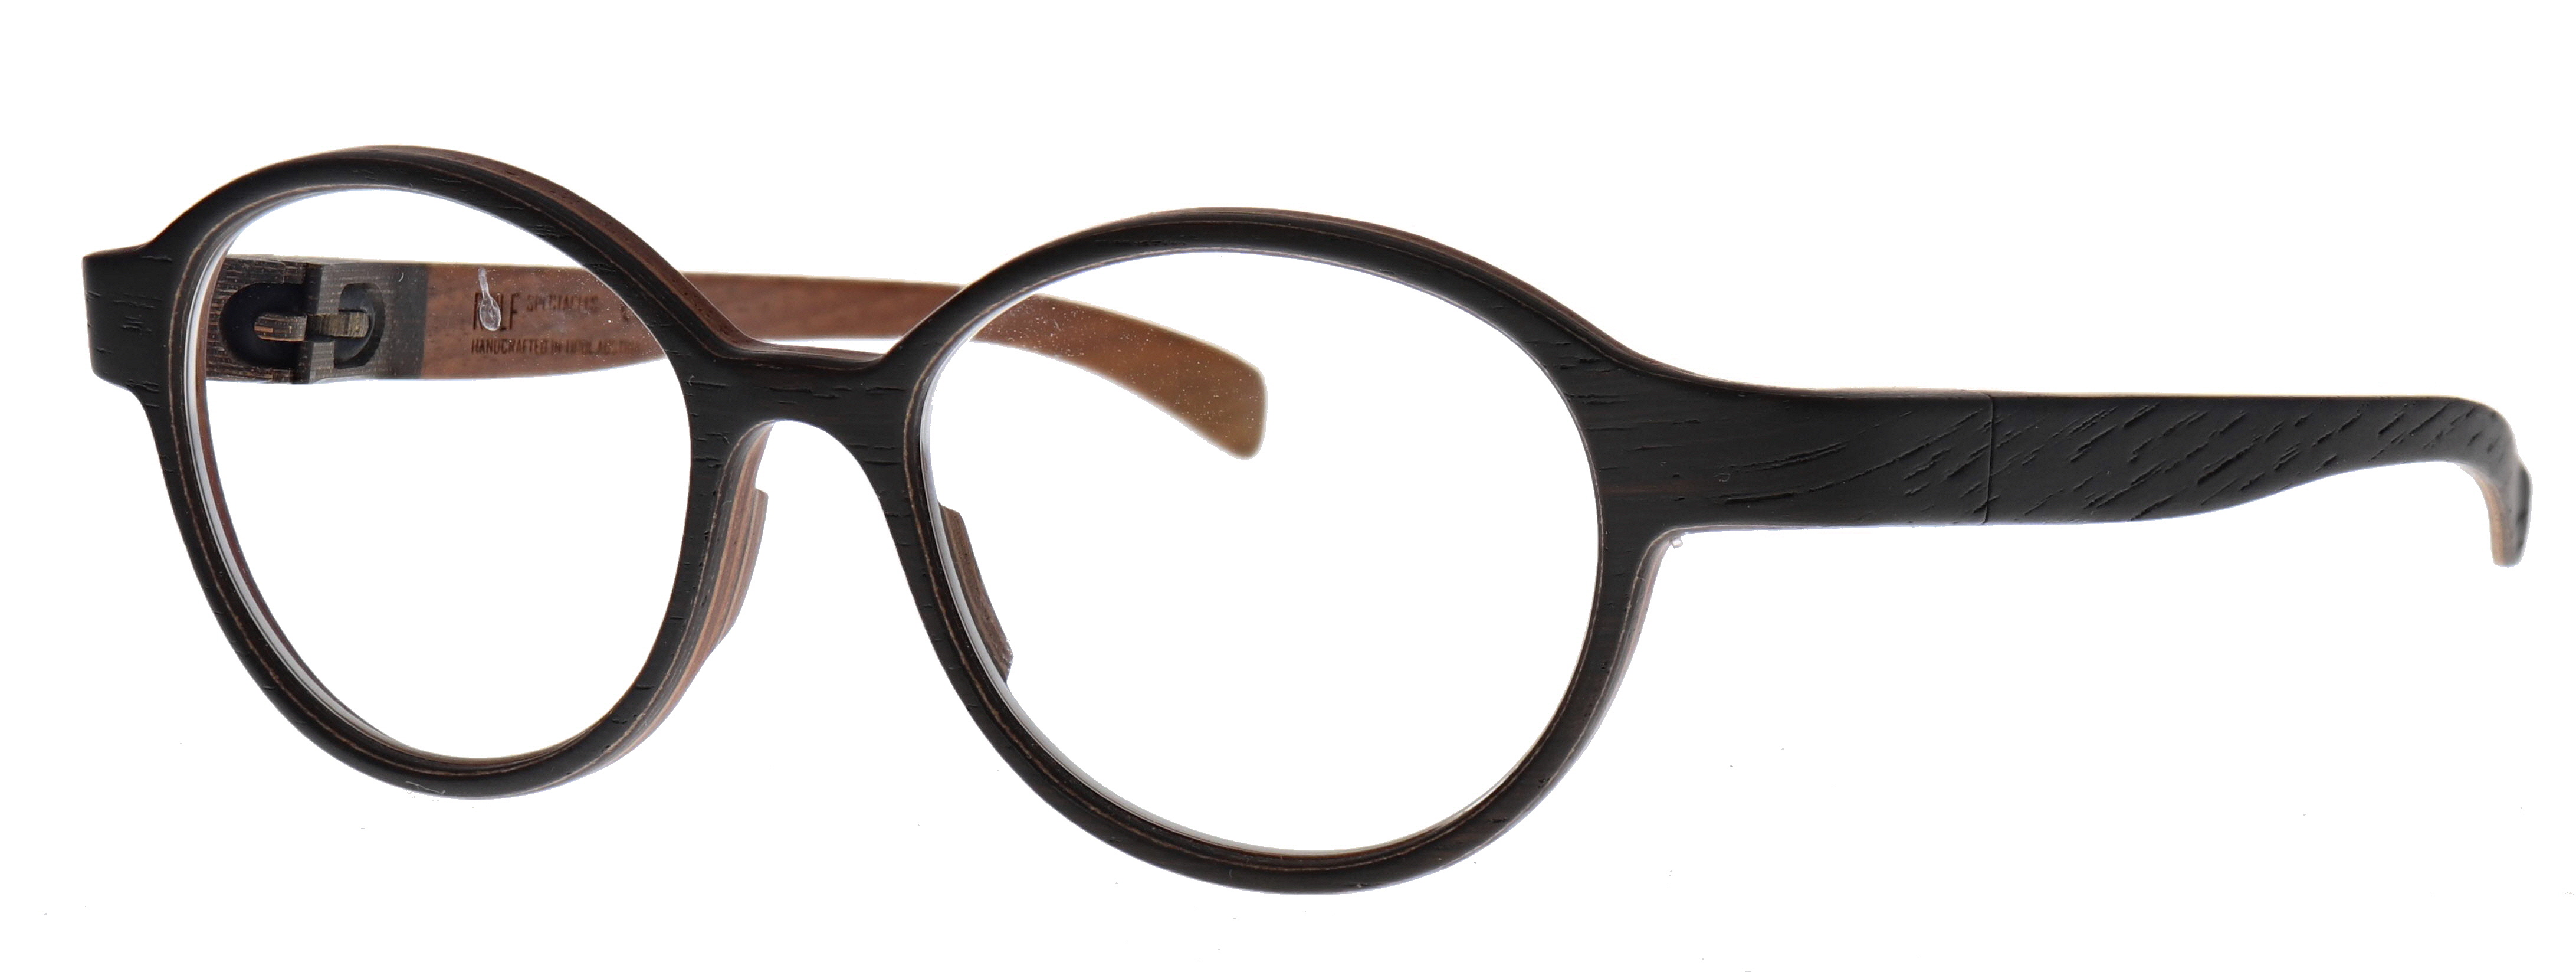 Rolf Spectacles Prestige